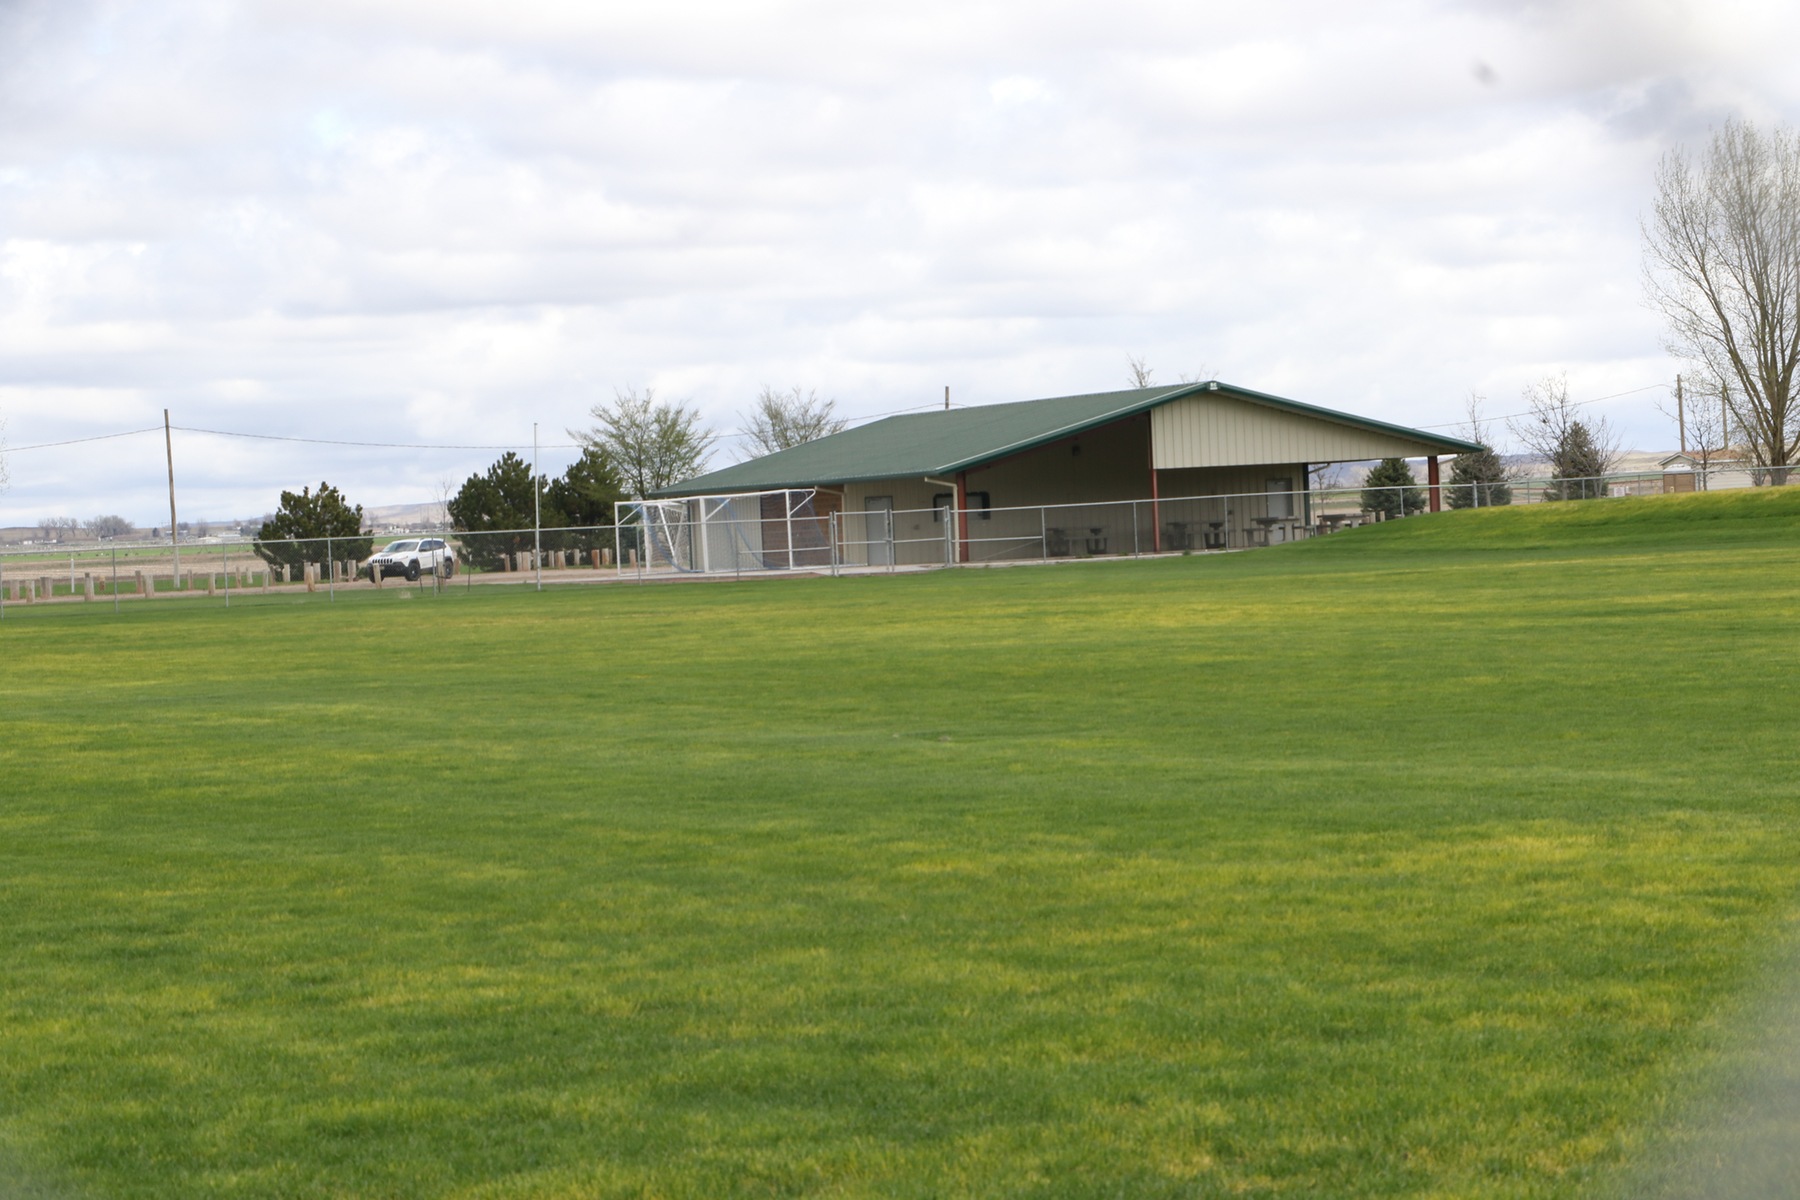 Landers Soccer Complex with building